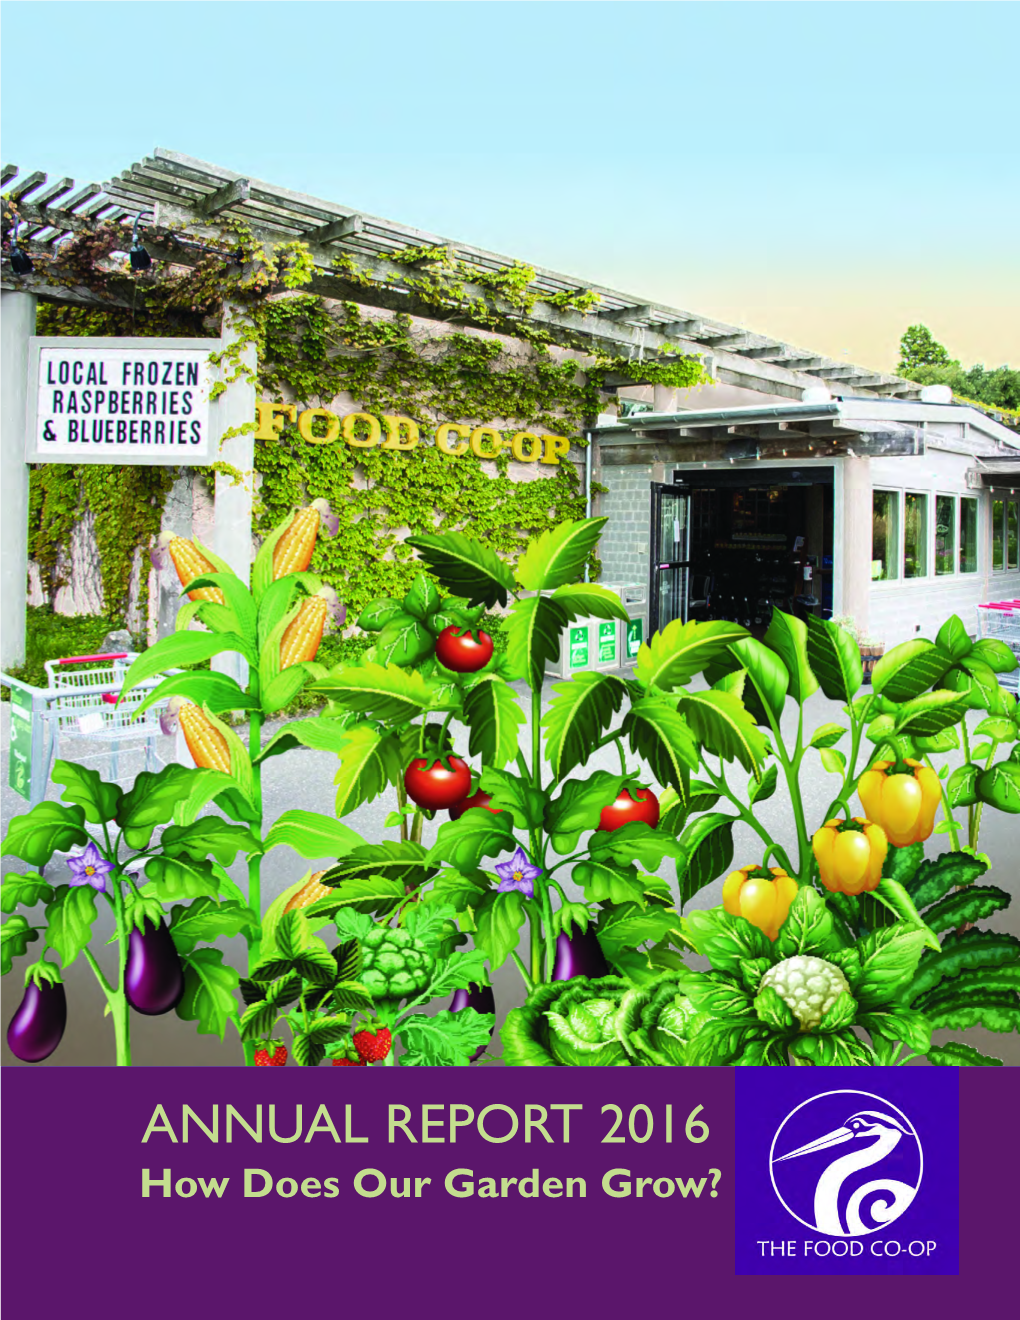 ANNUAL REPORT 2016 How Does Annualour Garden REPORT Grow? 2016 How Does Our Garden Grow? 1 the FOOD CO-OP ANNUAL REPORT 2016 Note from the Board President